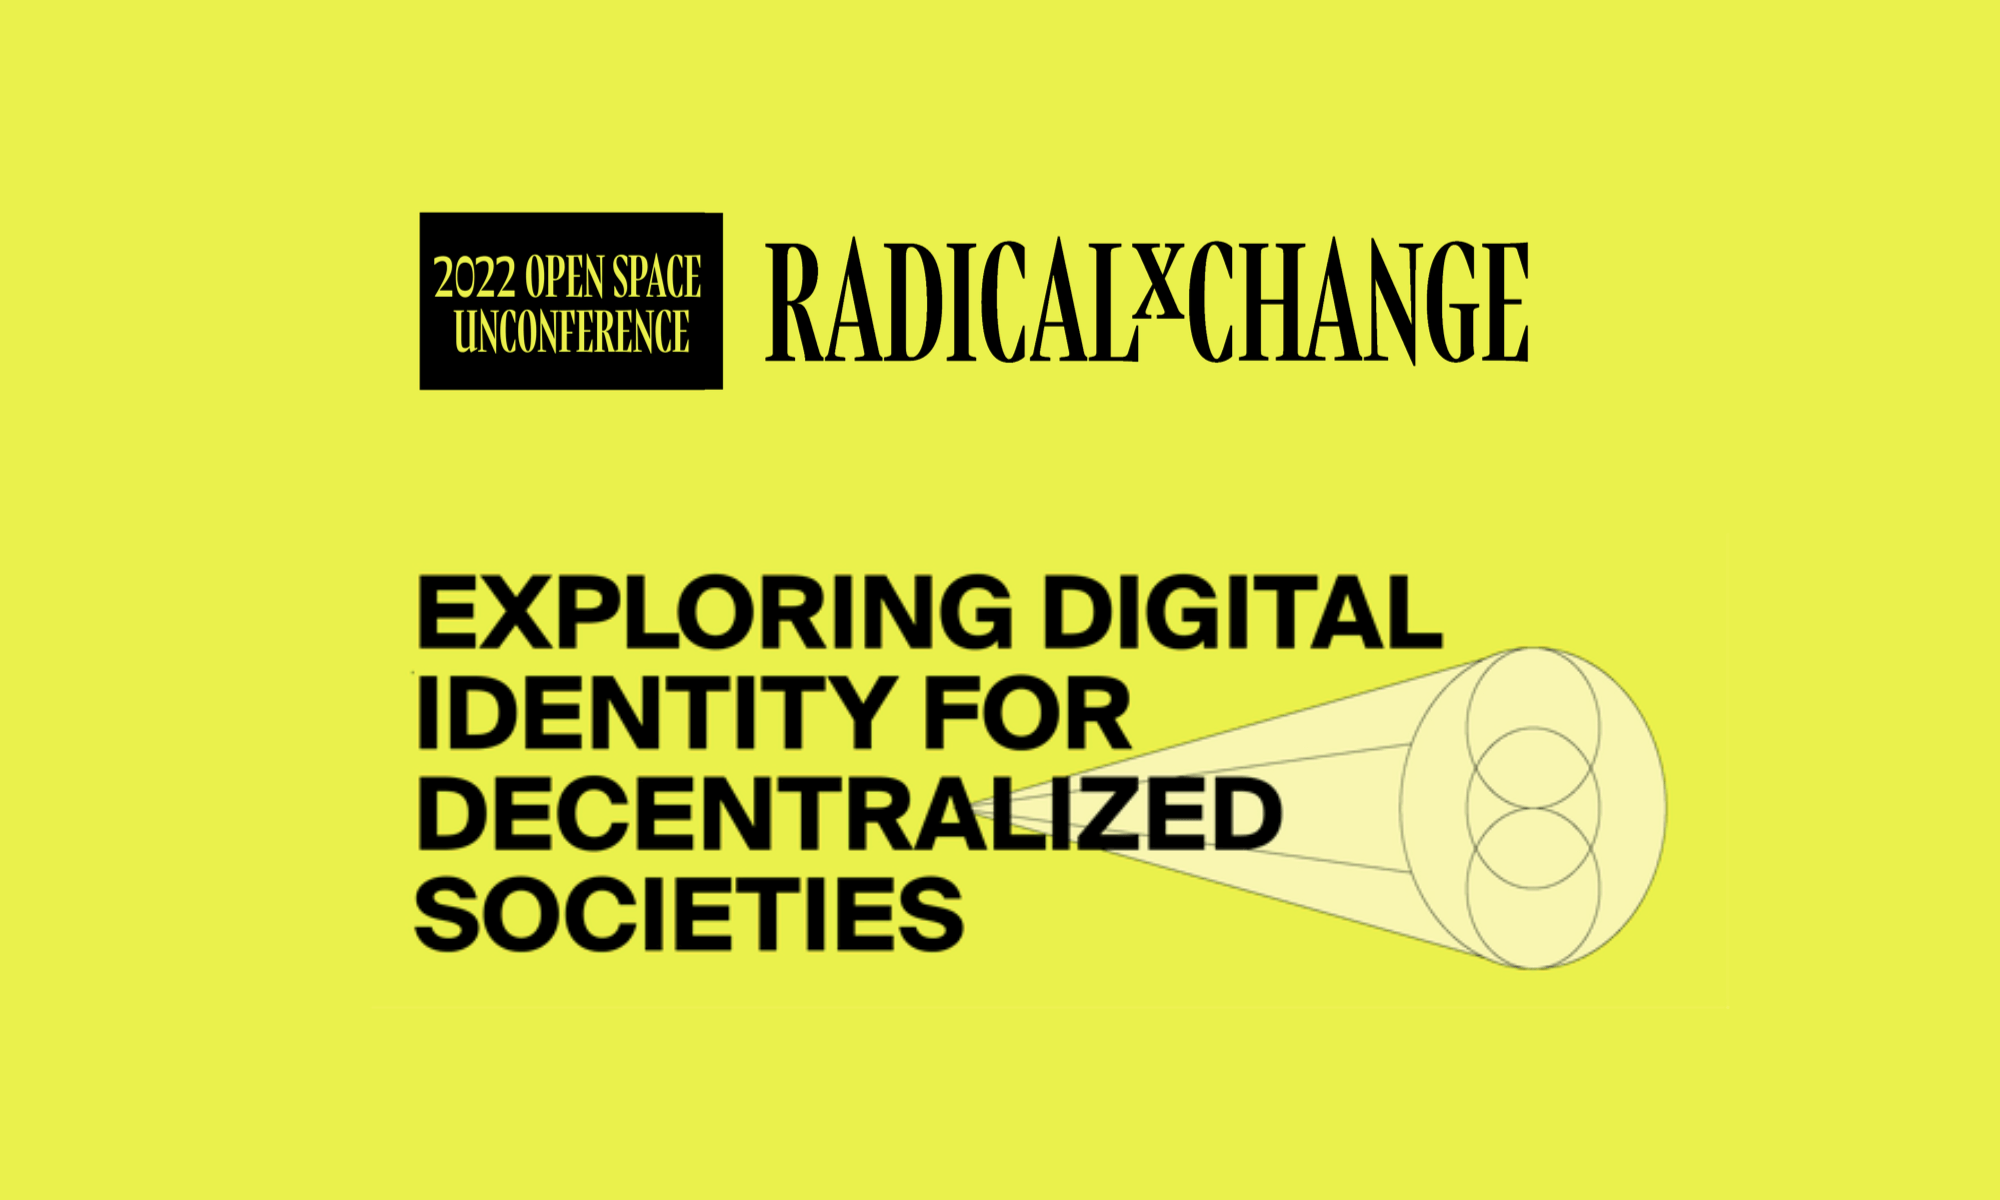 A presentation and good conversation at the RadicalxChange conference